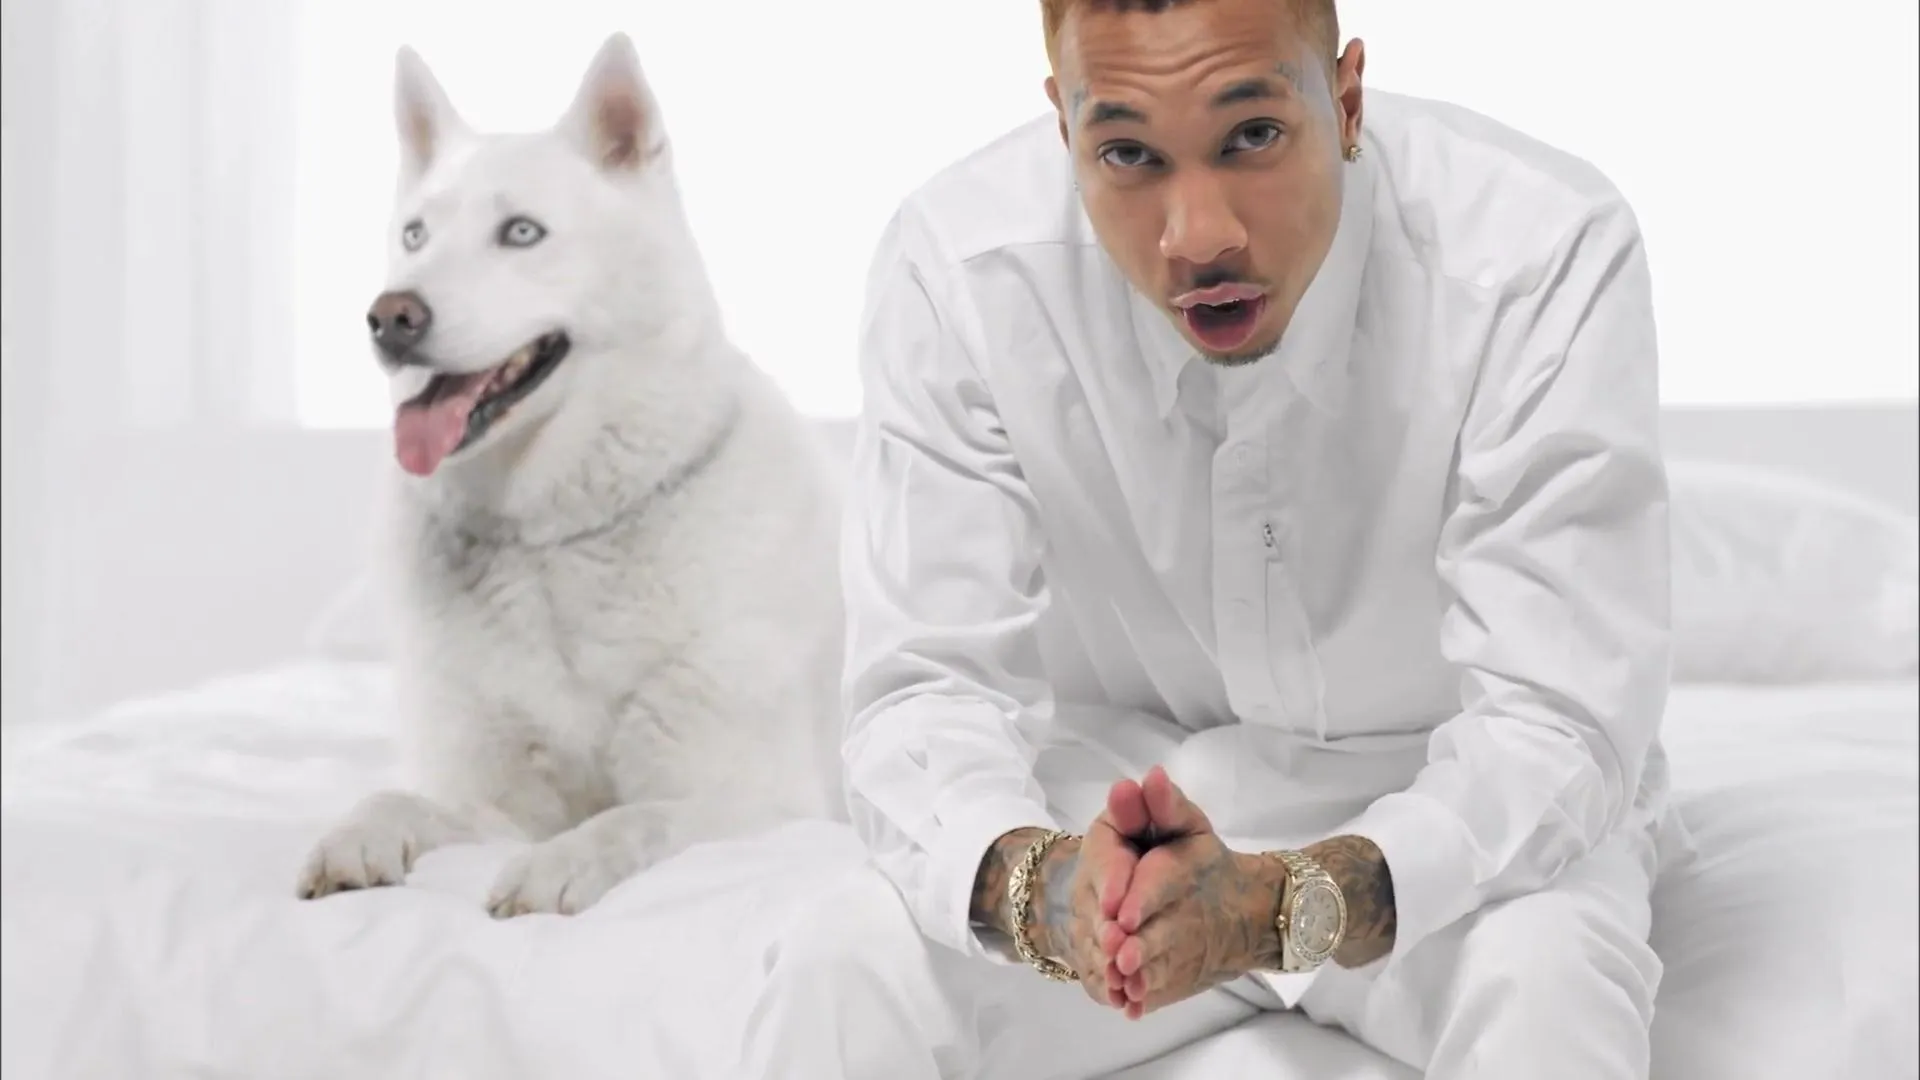 Tyga For The Road Explicit ft Chris Brown HD 1080p x264 2013 wwwBestVideoRapcom14 00 13